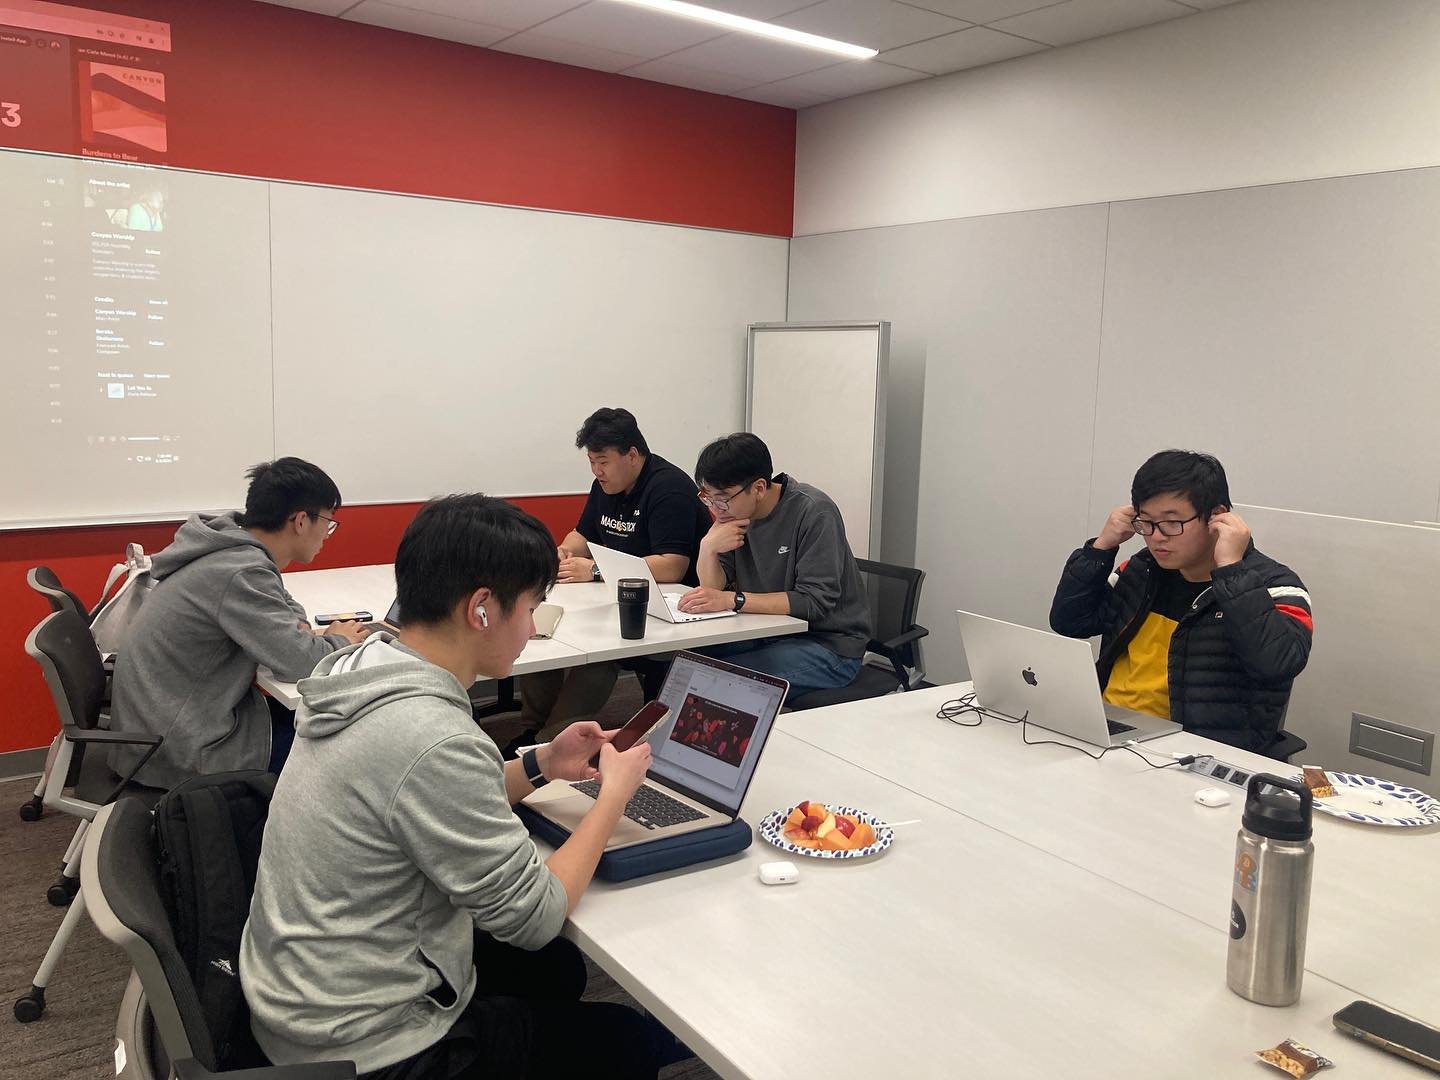 🎞2023.5.3 Study Hall📚
Hope you&rsquo;re studying hard these days like those bros from our Friday study hall&hellip;📖🦾
&hellip; then you&rsquo;ll be done and can join us at PWB 3-154 this Friday (starting with dinner at 6:30pm) for our end-of-seme